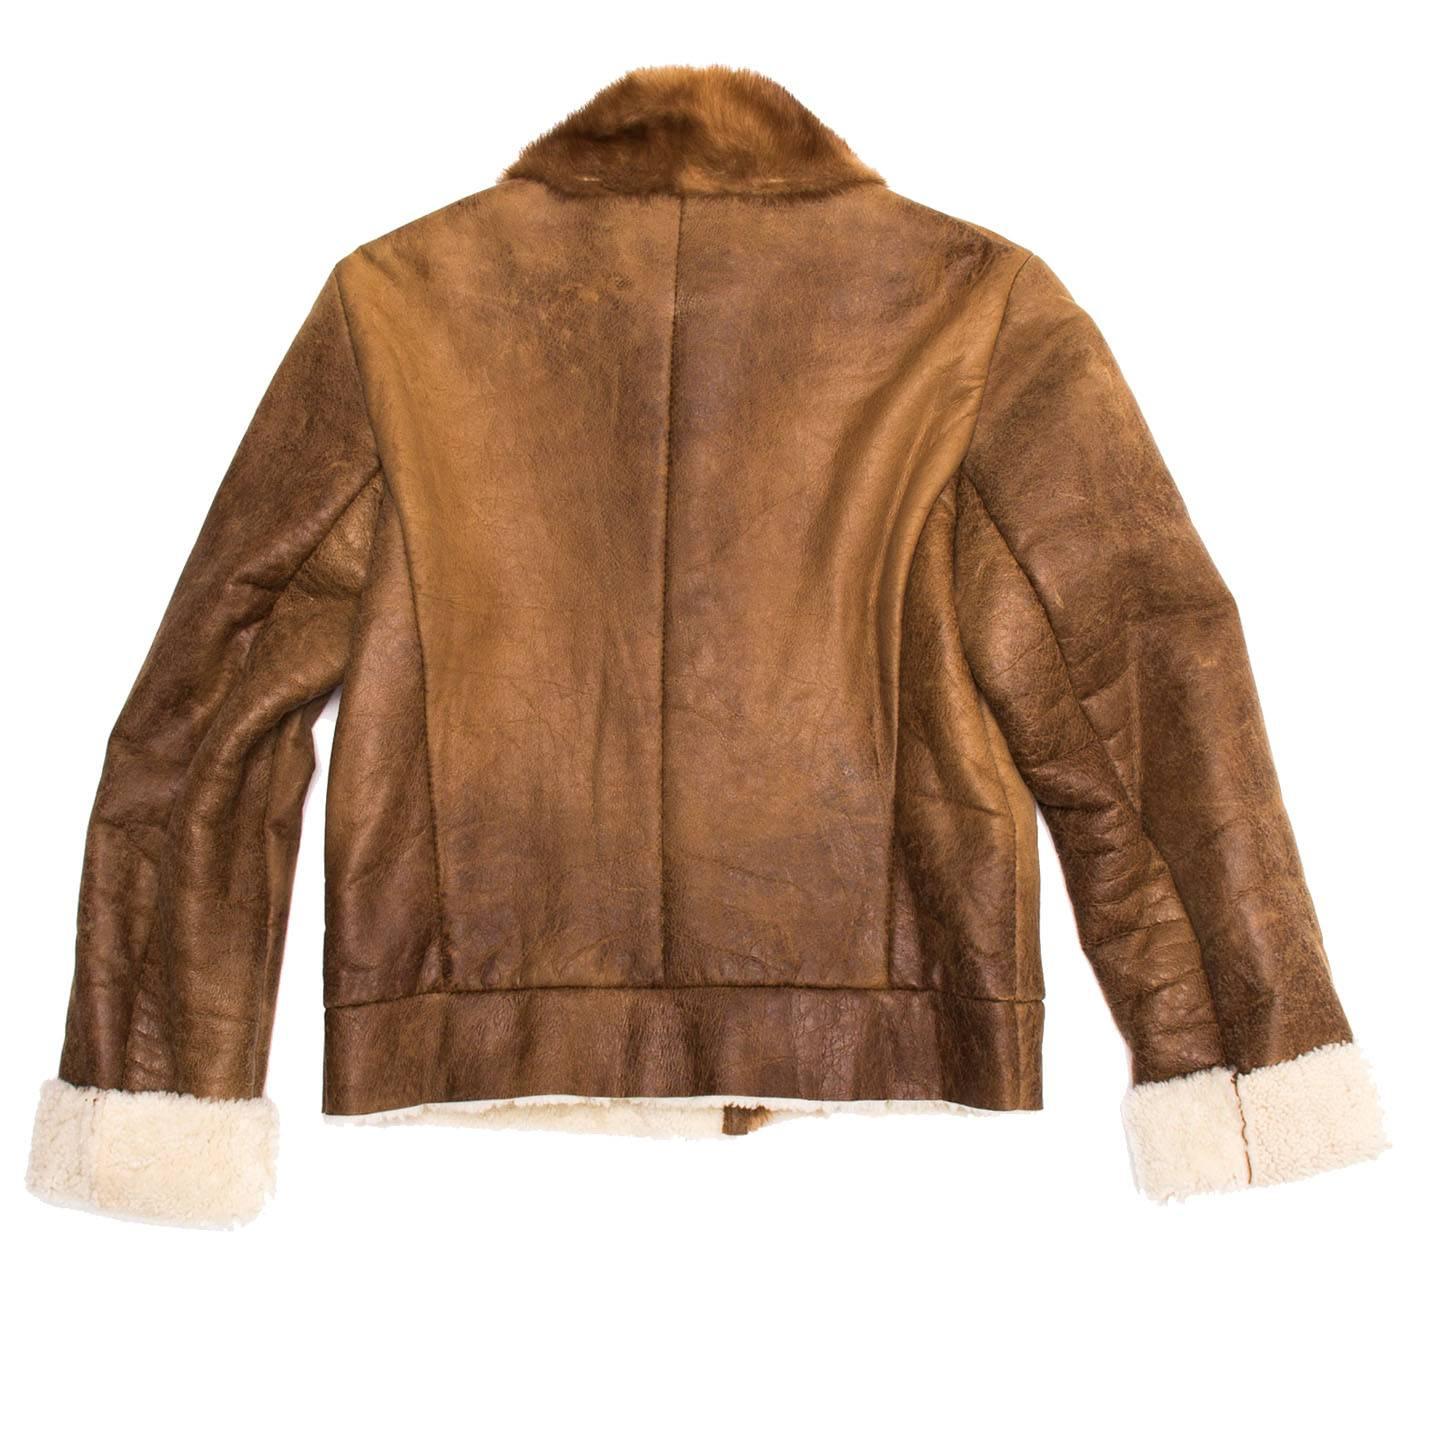 Prada Brown Distressed Shearling Jacket In Excellent Condition For Sale In Brooklyn, NY